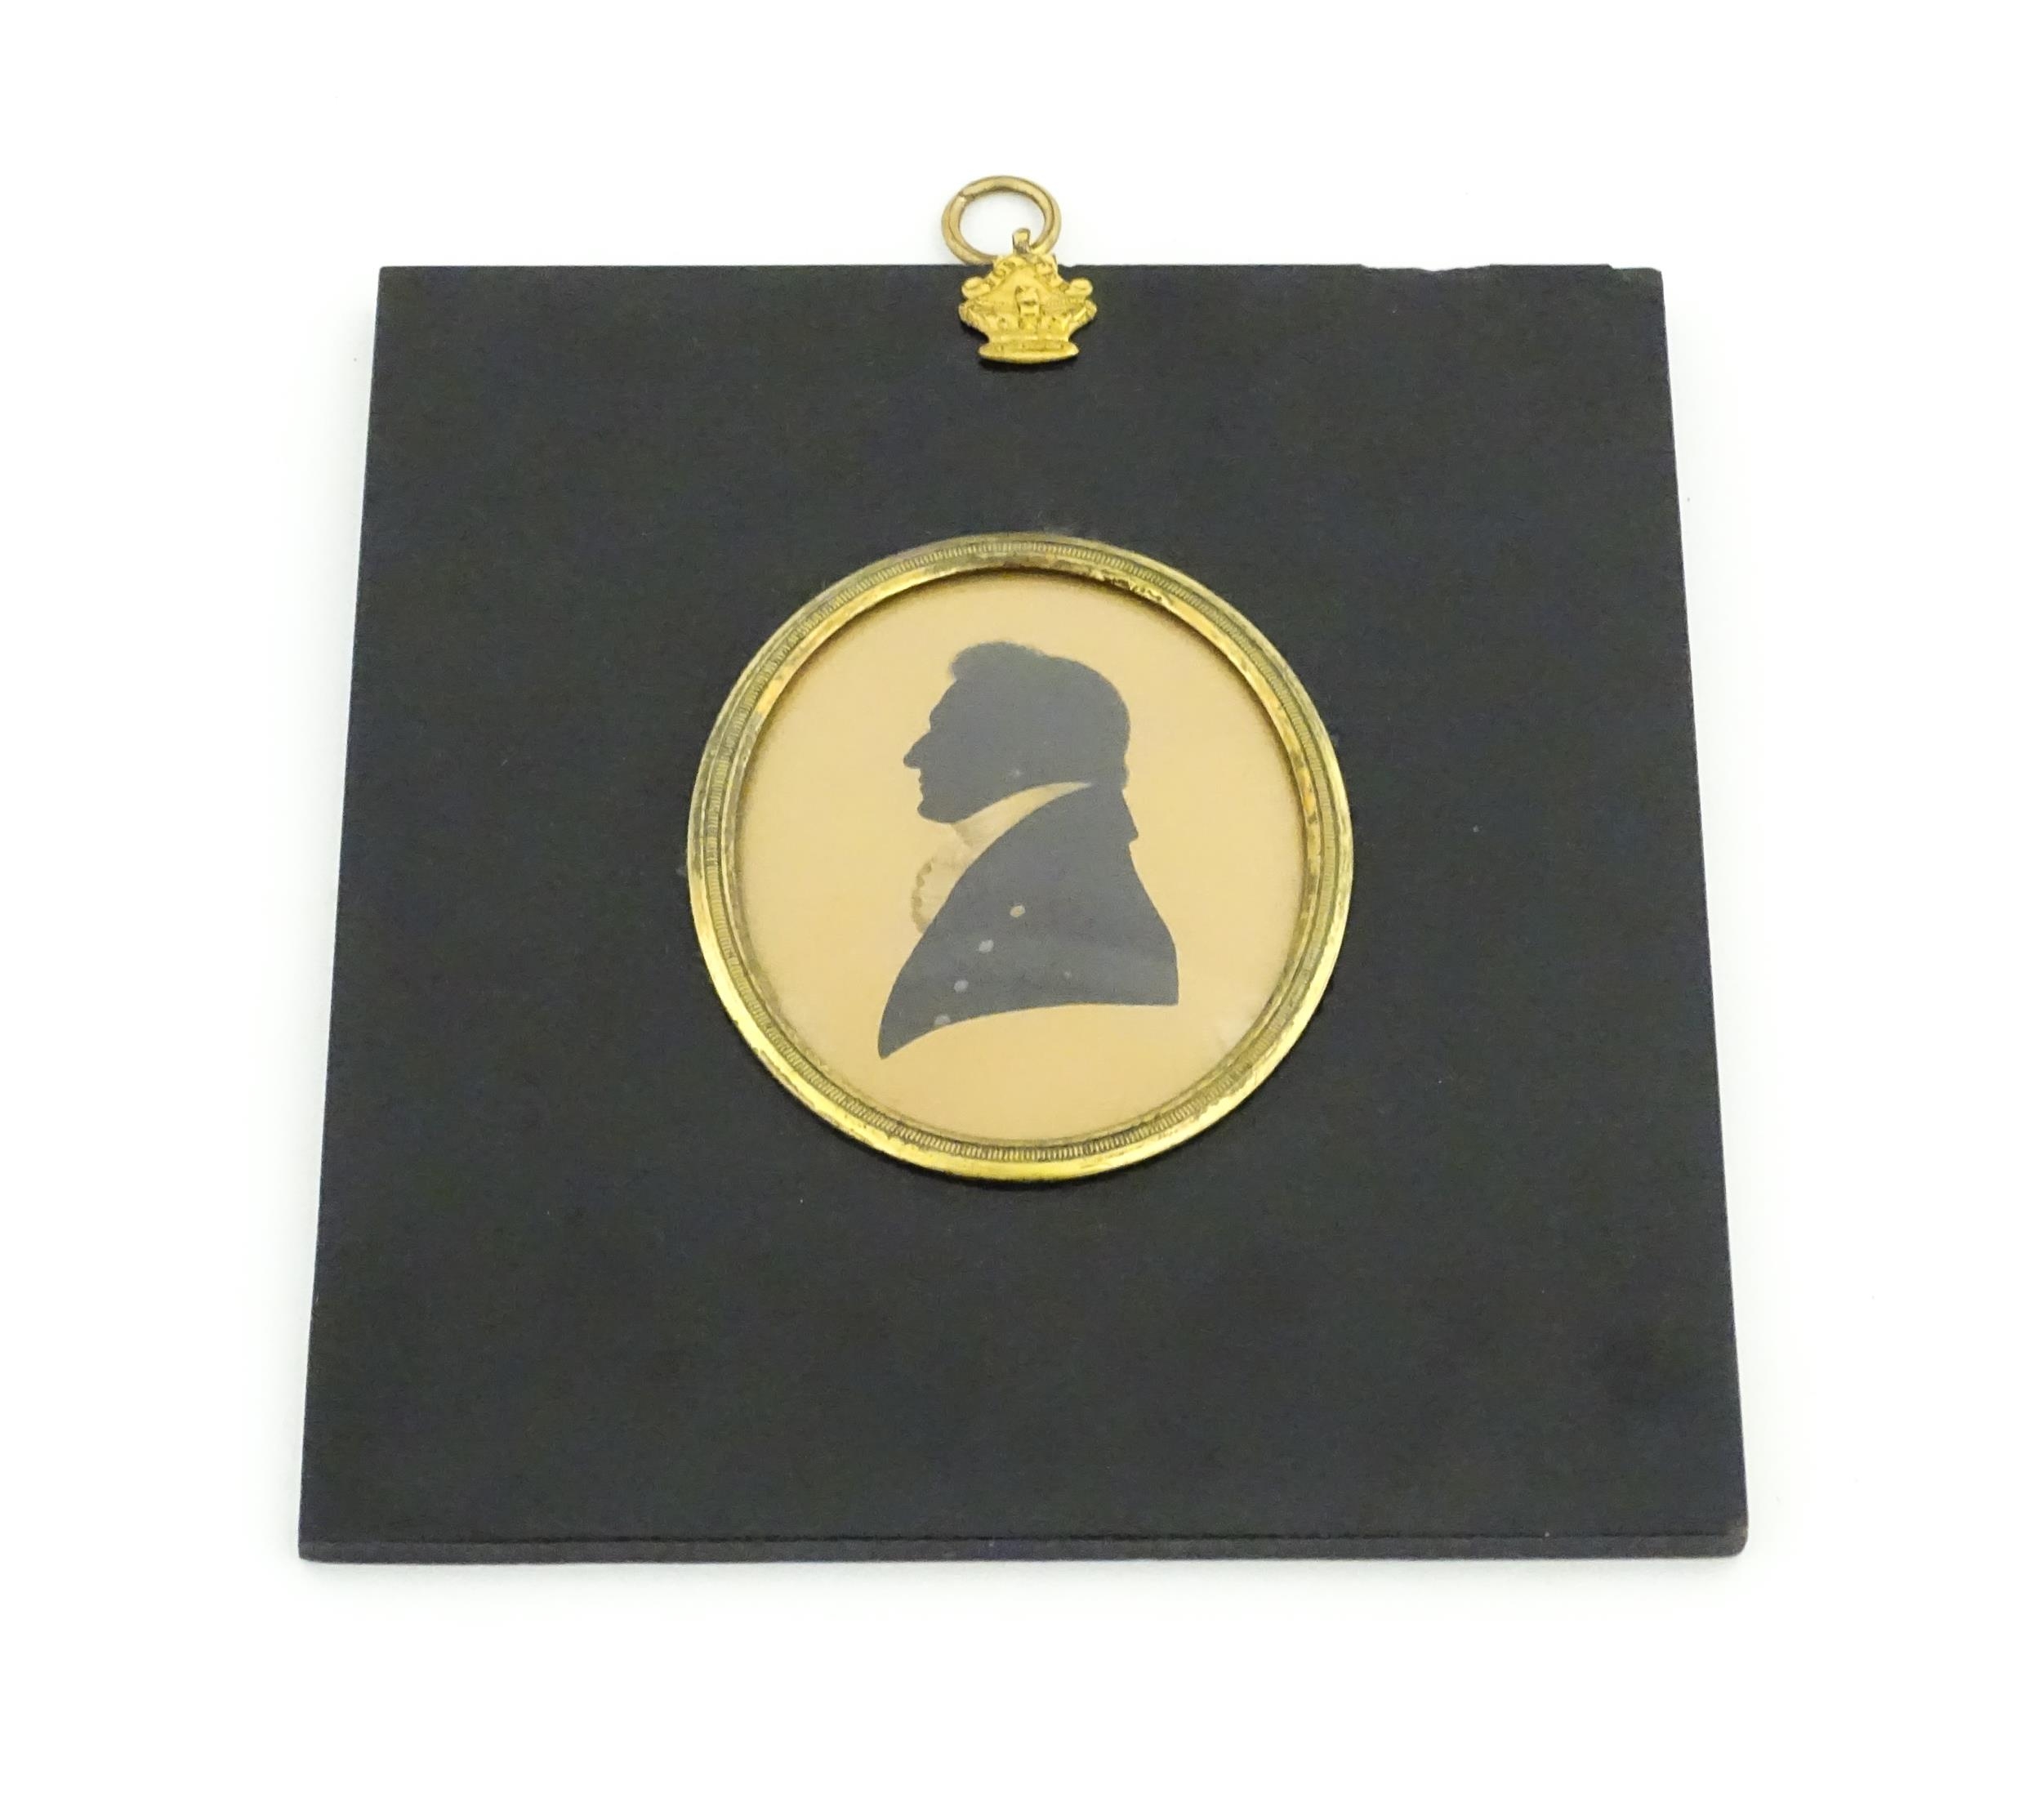 Two 19thC portrait miniature in the manner of Edward Ward Foster, one a silhouette portrait - Image 3 of 8